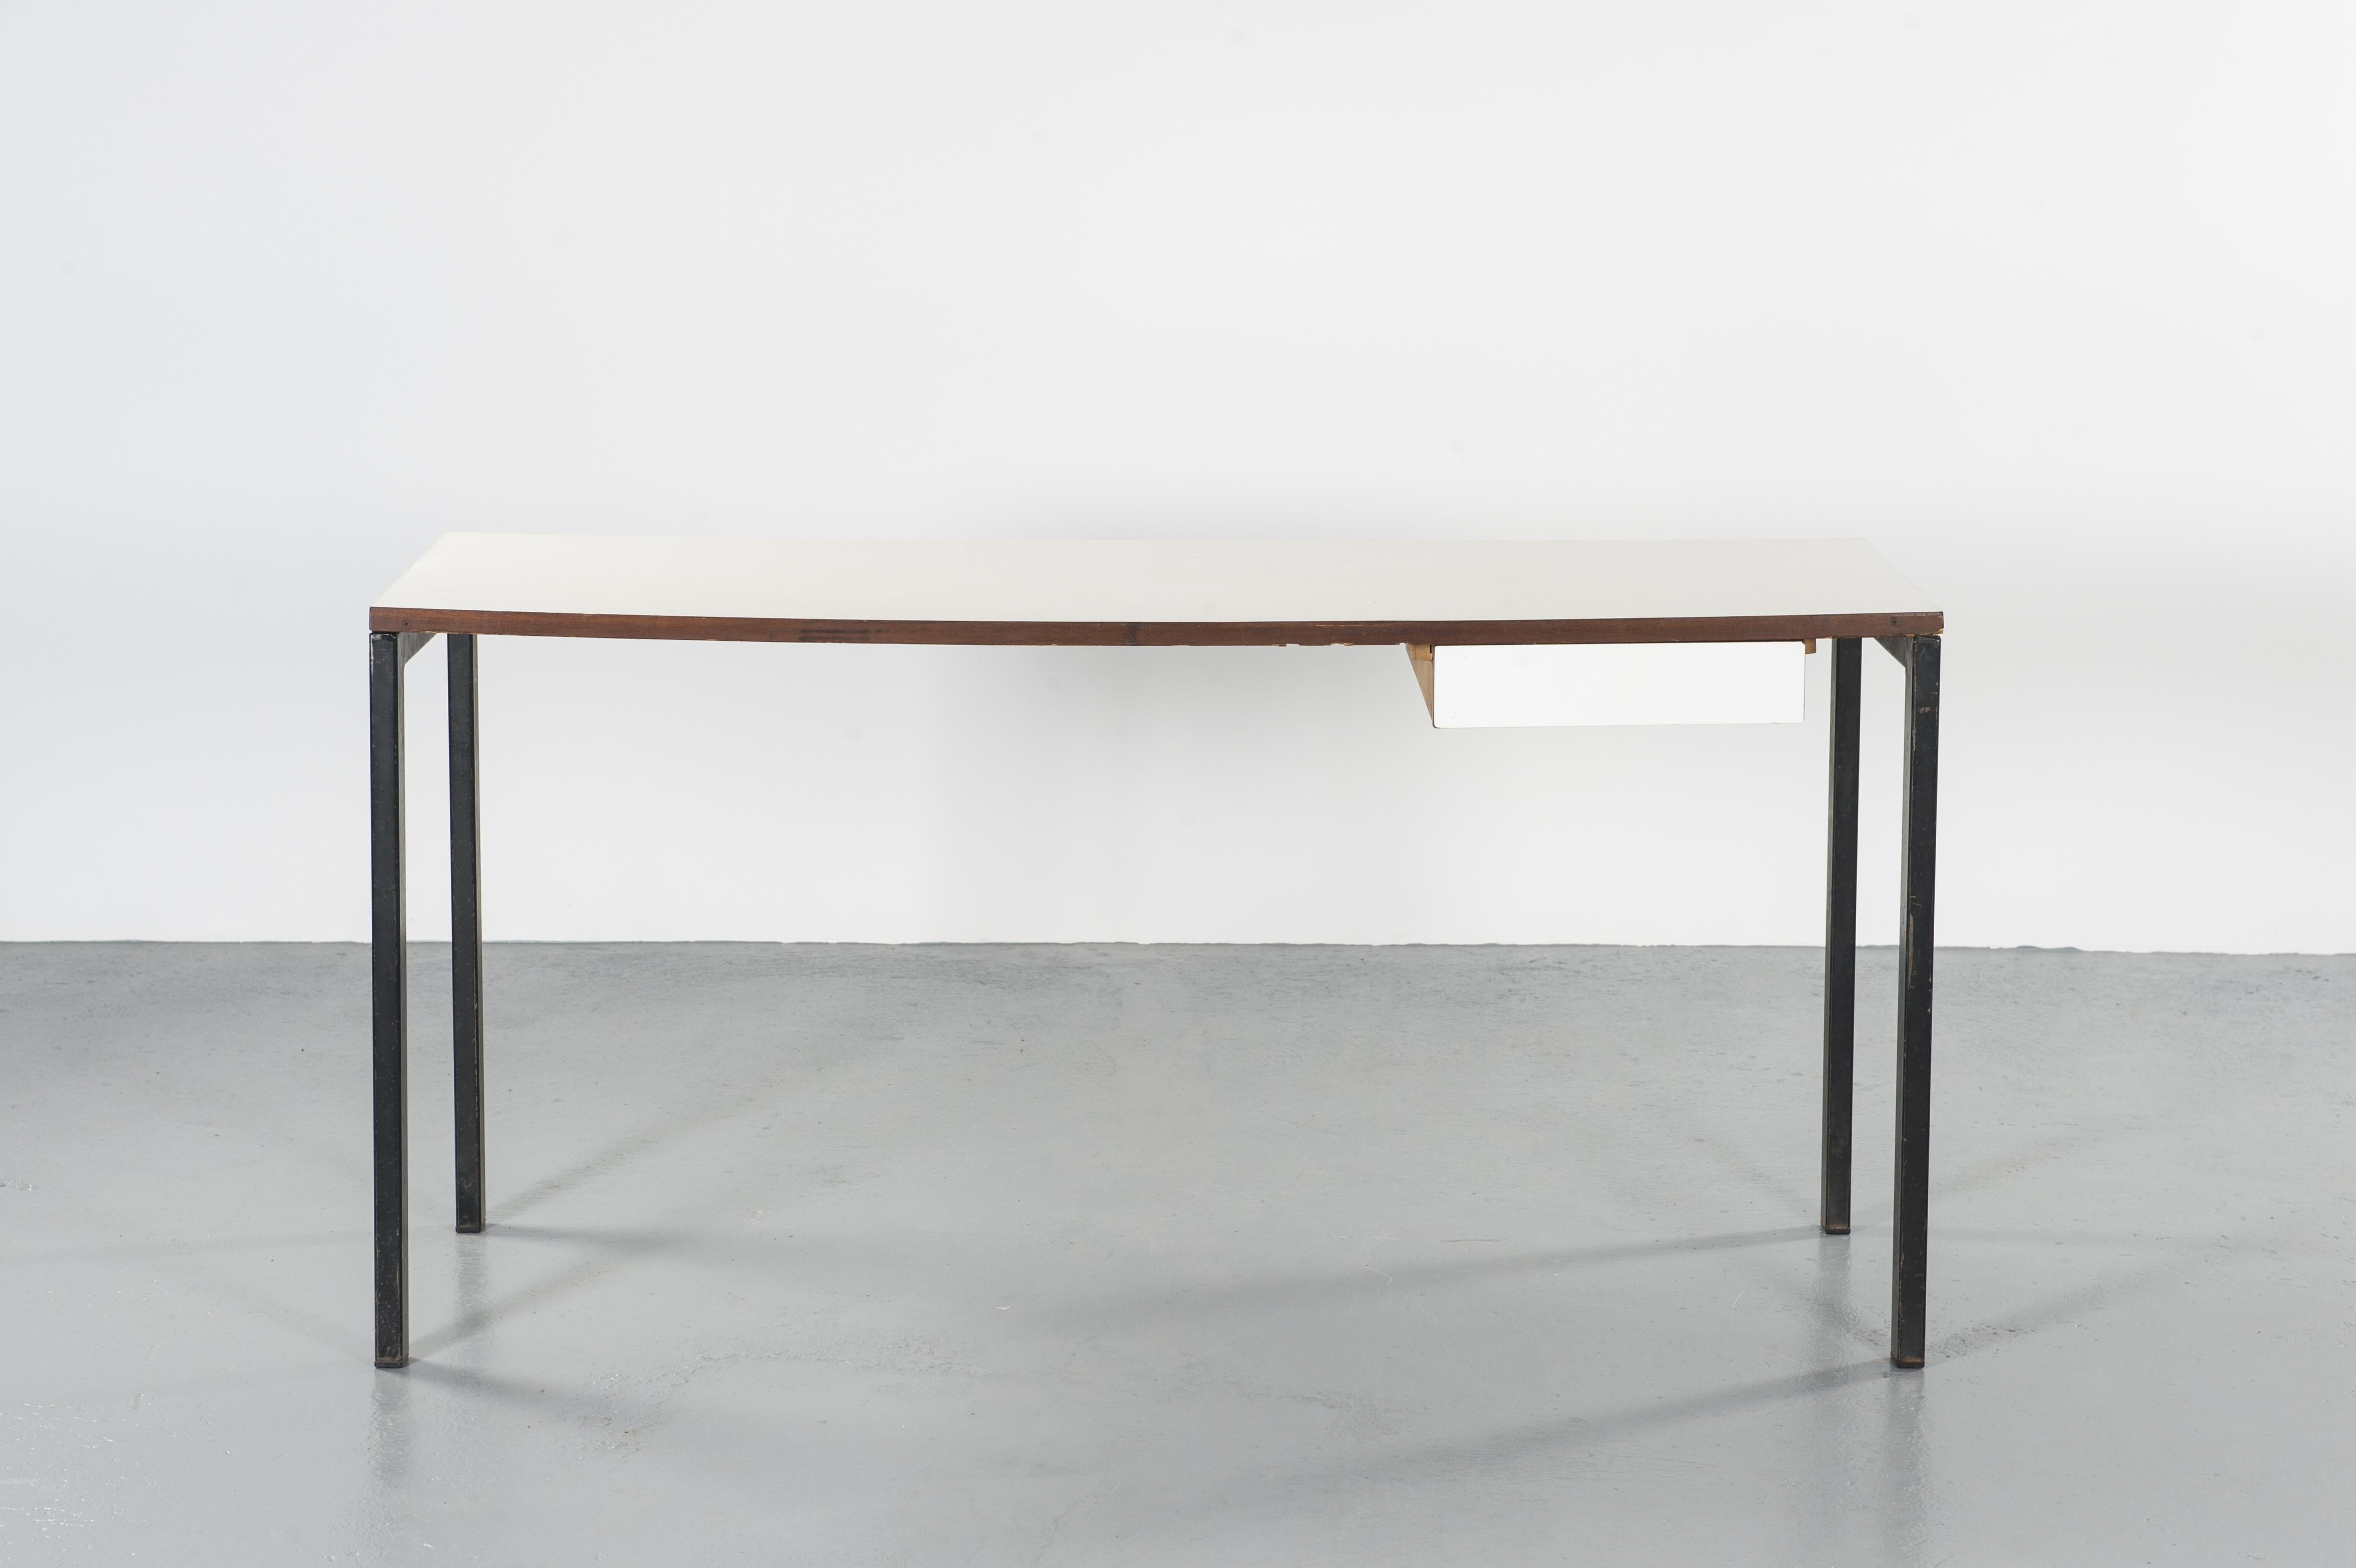 Cansado mining town Charlotte Perriand console, circa 1960, Mauritania 

Console or desk in Mahogany veneering with one drawer, top in laminate formica. The base is in metal painted black.

Charlotte Perriand is a French architect and designer,